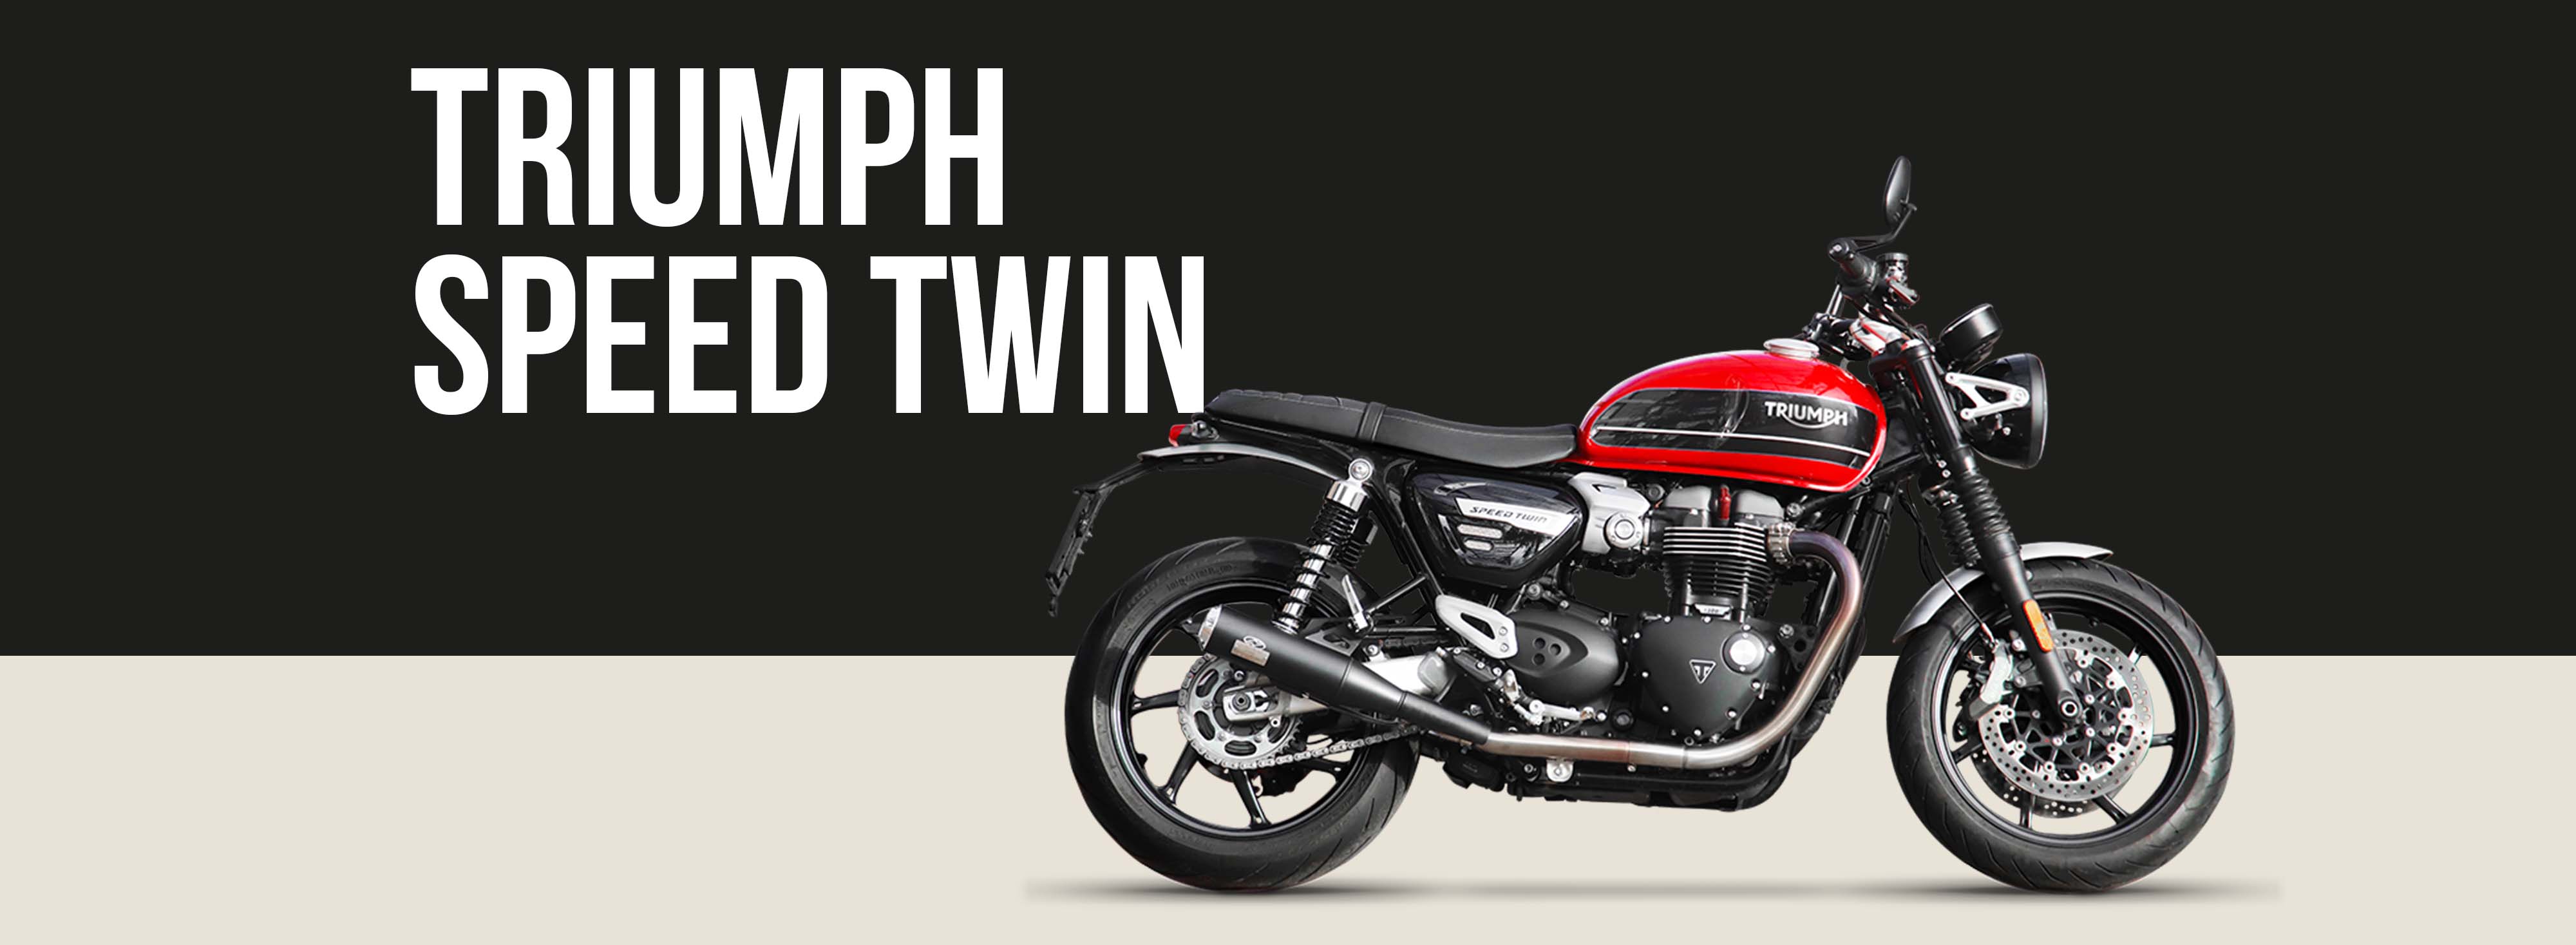 Triumph Speed Twin Motorcycle Brand Page Header